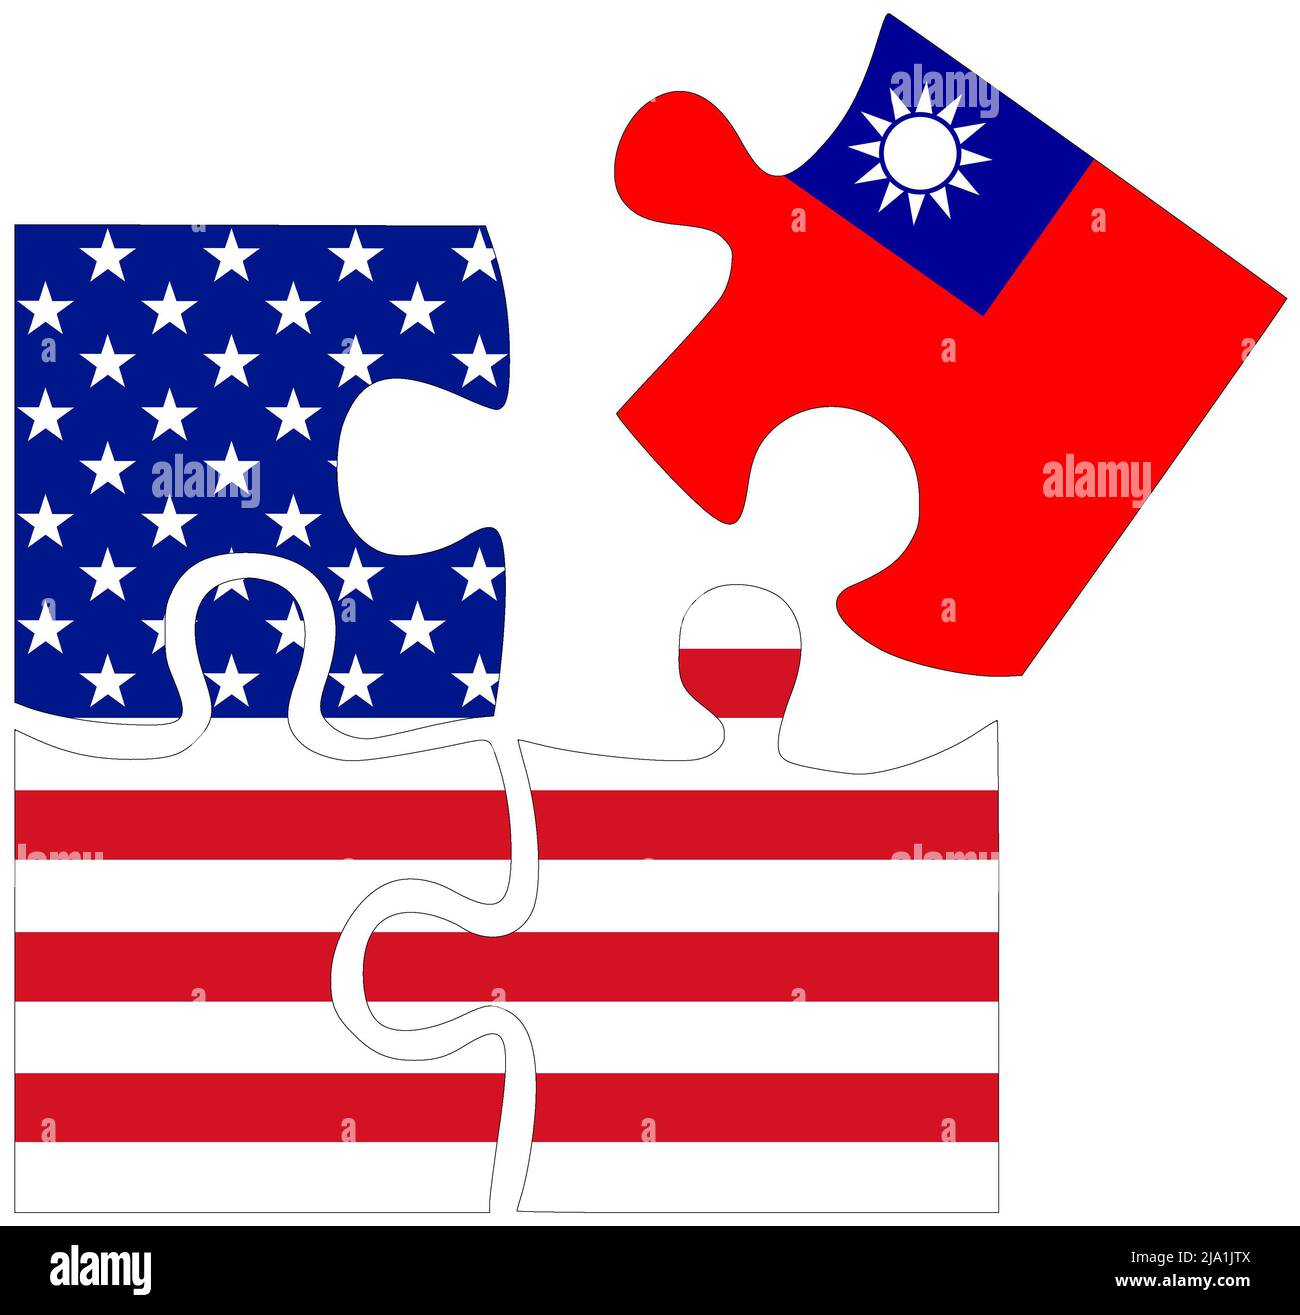 USA - Taiwan : puzzle shapes with flags, symbol of agreement or friendship Stock Photo